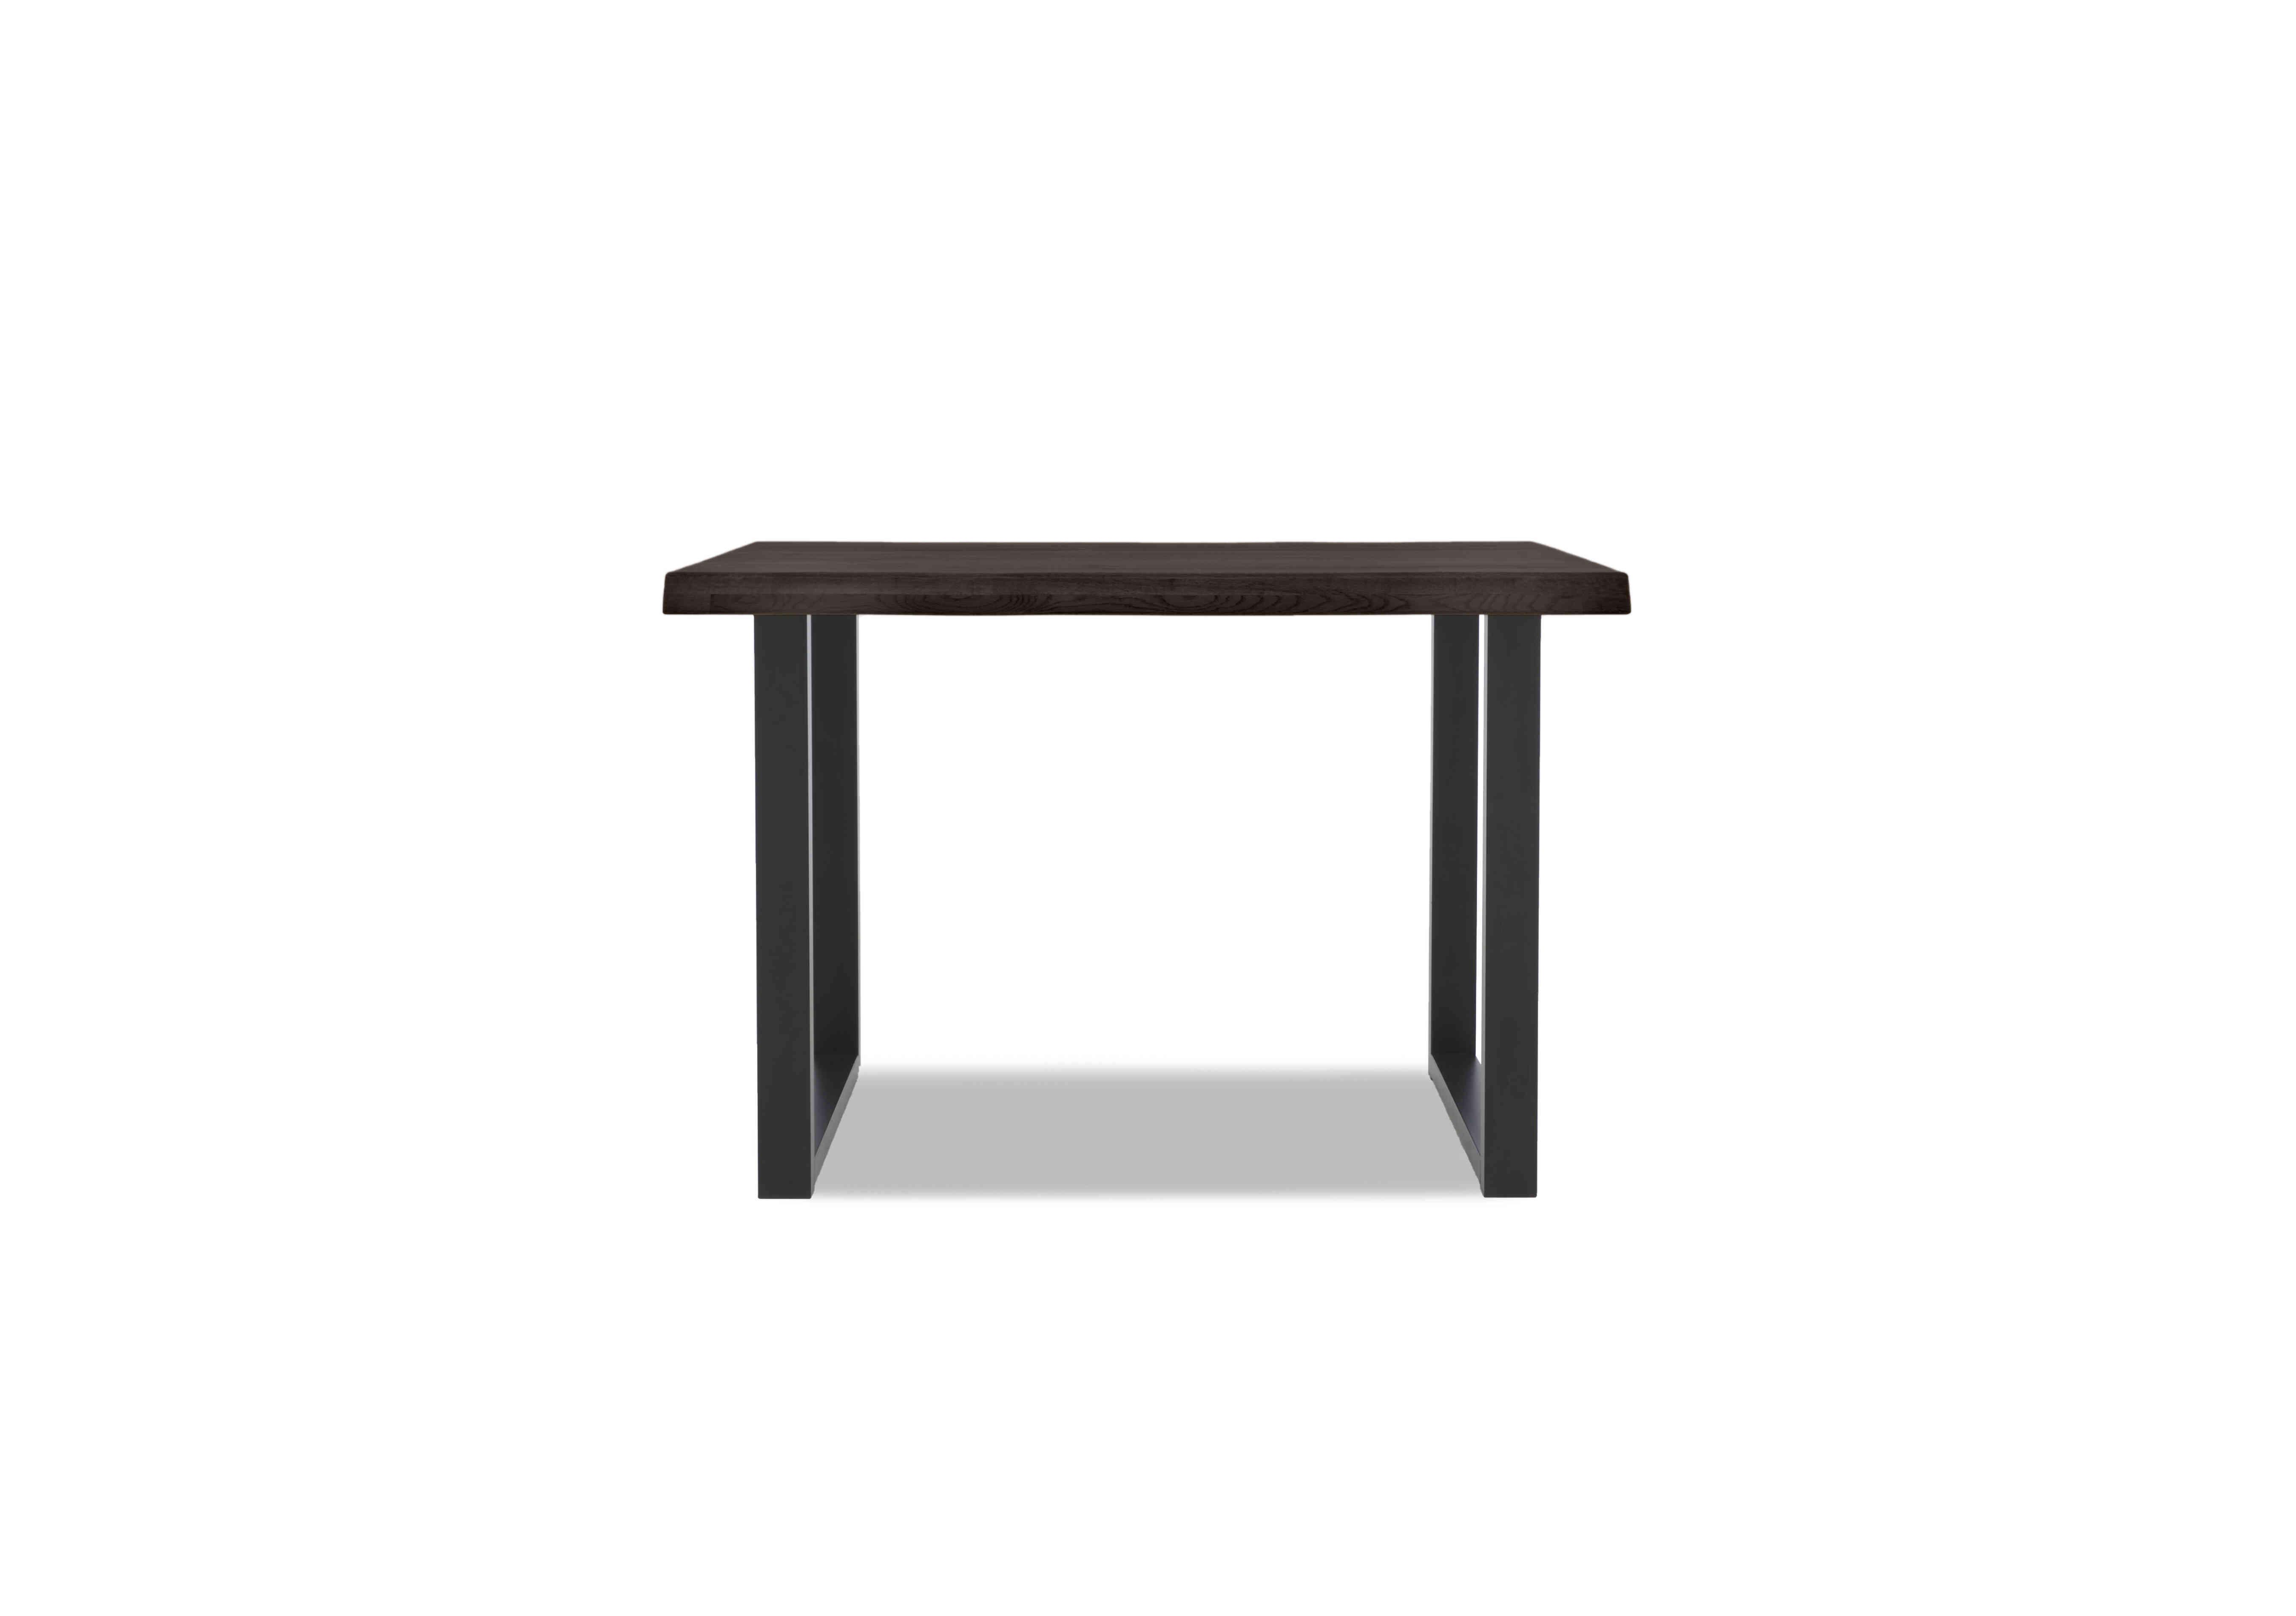 Compact Terra Raw Edge Bar Table with U-Shaped Legs in 02 Smoked on Furniture Village